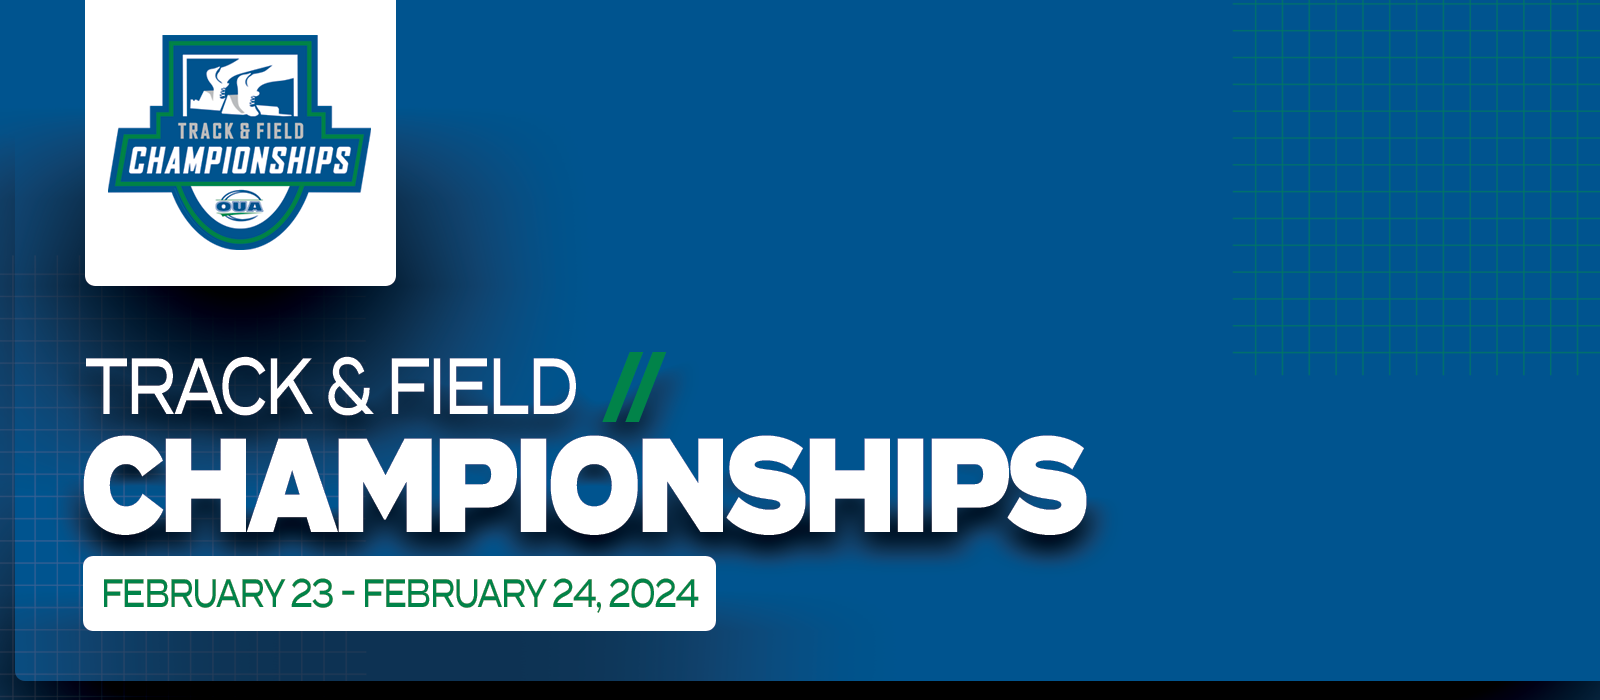 Predominantly blue graphic with large white text on the left side that reads Track & Field Championships, February 23 – February 24, 2024’ beneath the OUA Track & Field Championships logo